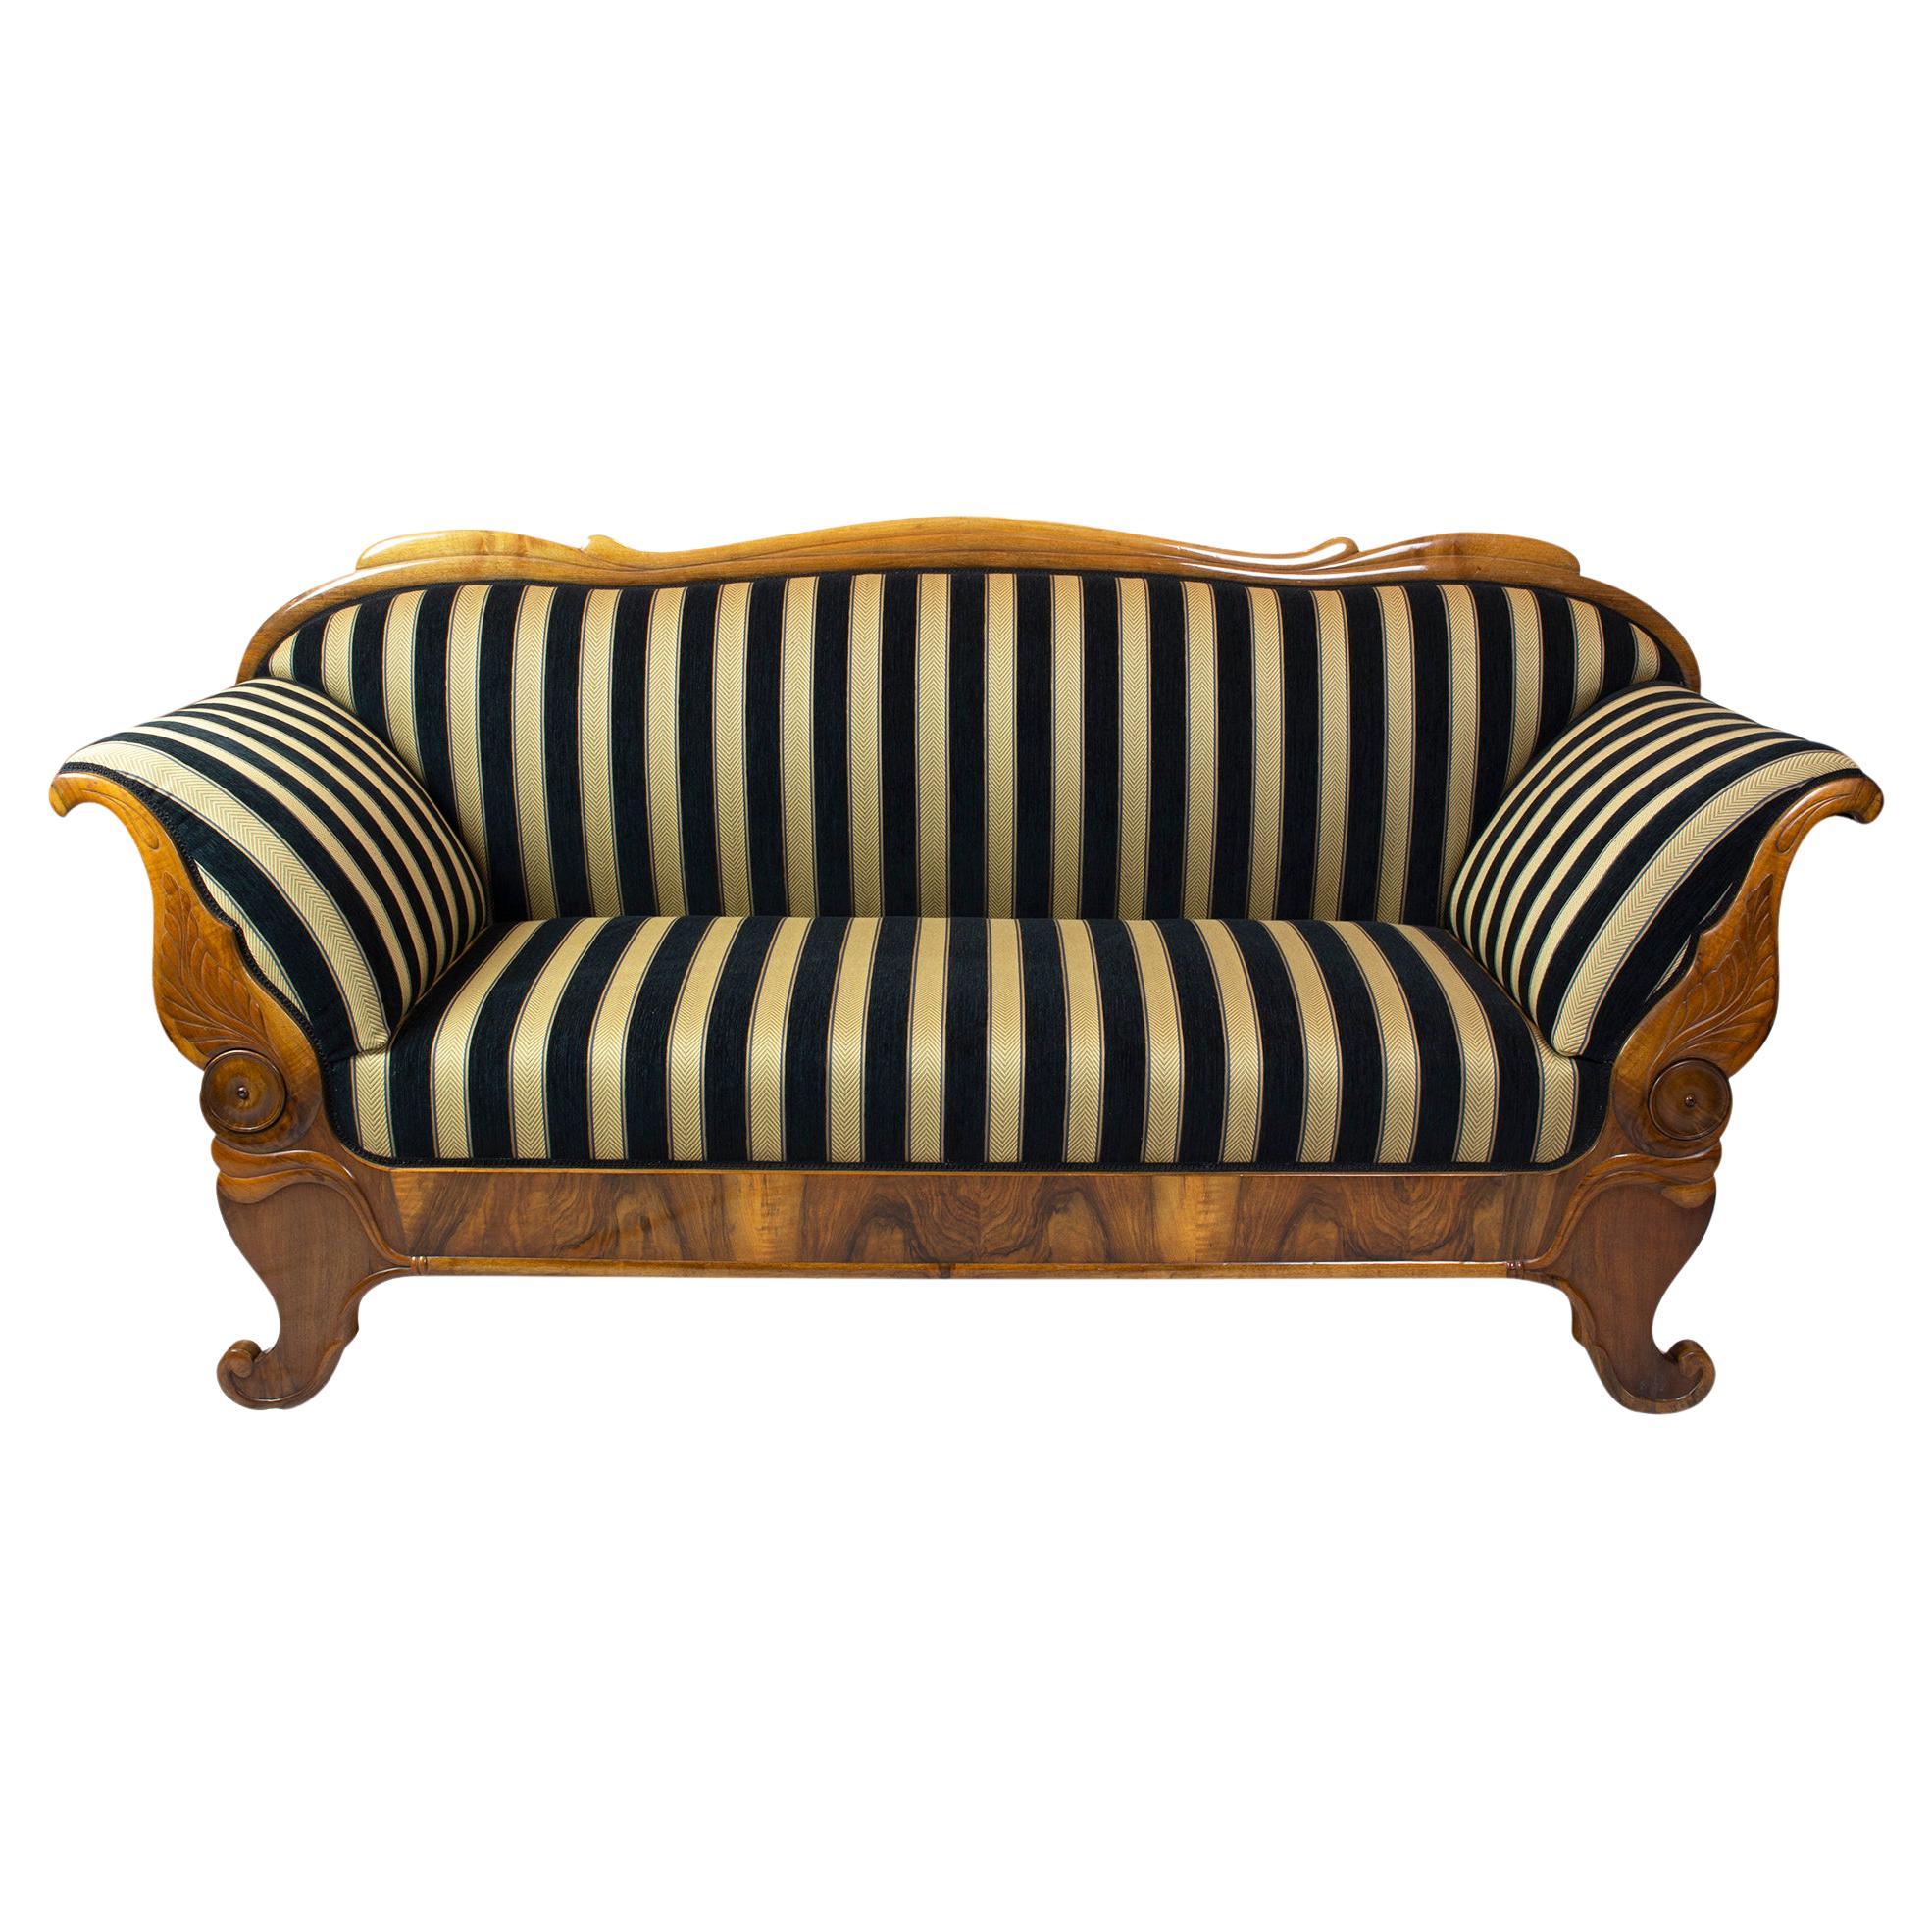 Early 19th Century Biedermeier Walnut Sofa from Germany For Sale at 1stDibs